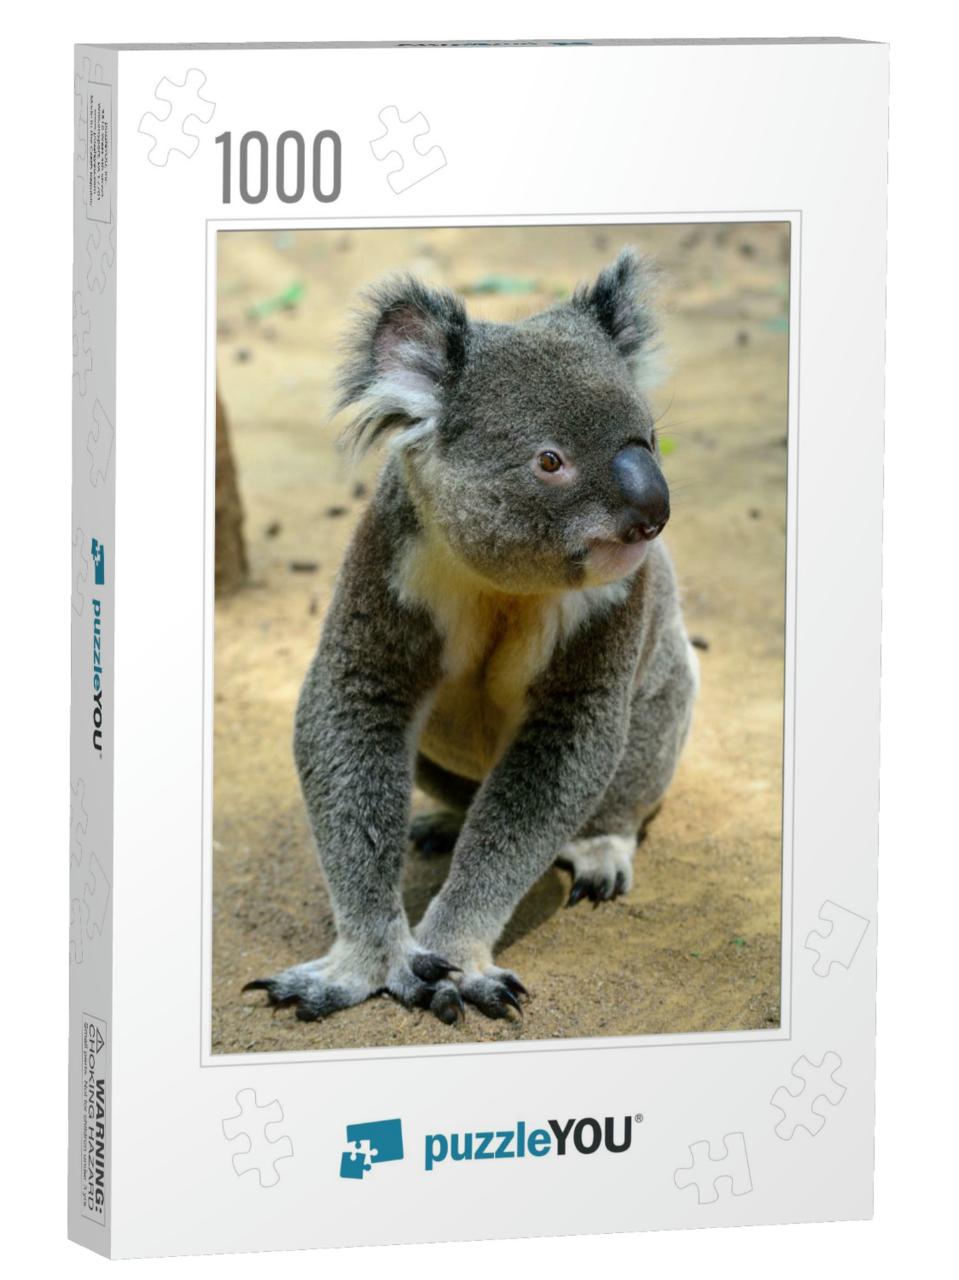 Koala Sitting on the Ground in Queensland, Australia... Jigsaw Puzzle with 1000 pieces